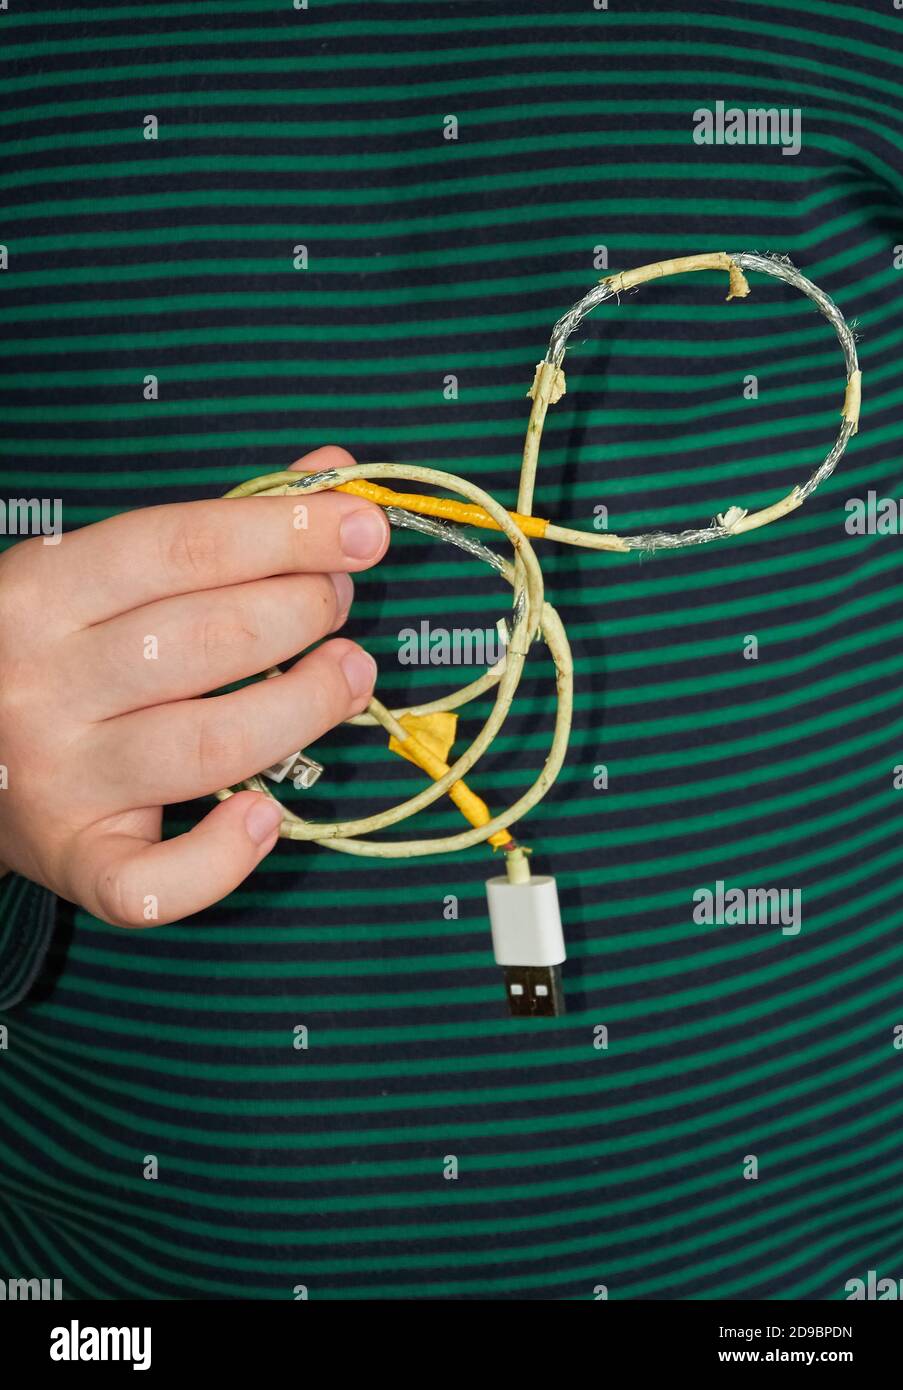 The child is holding an old torn USB cord in his hand. Close up Stock Photo